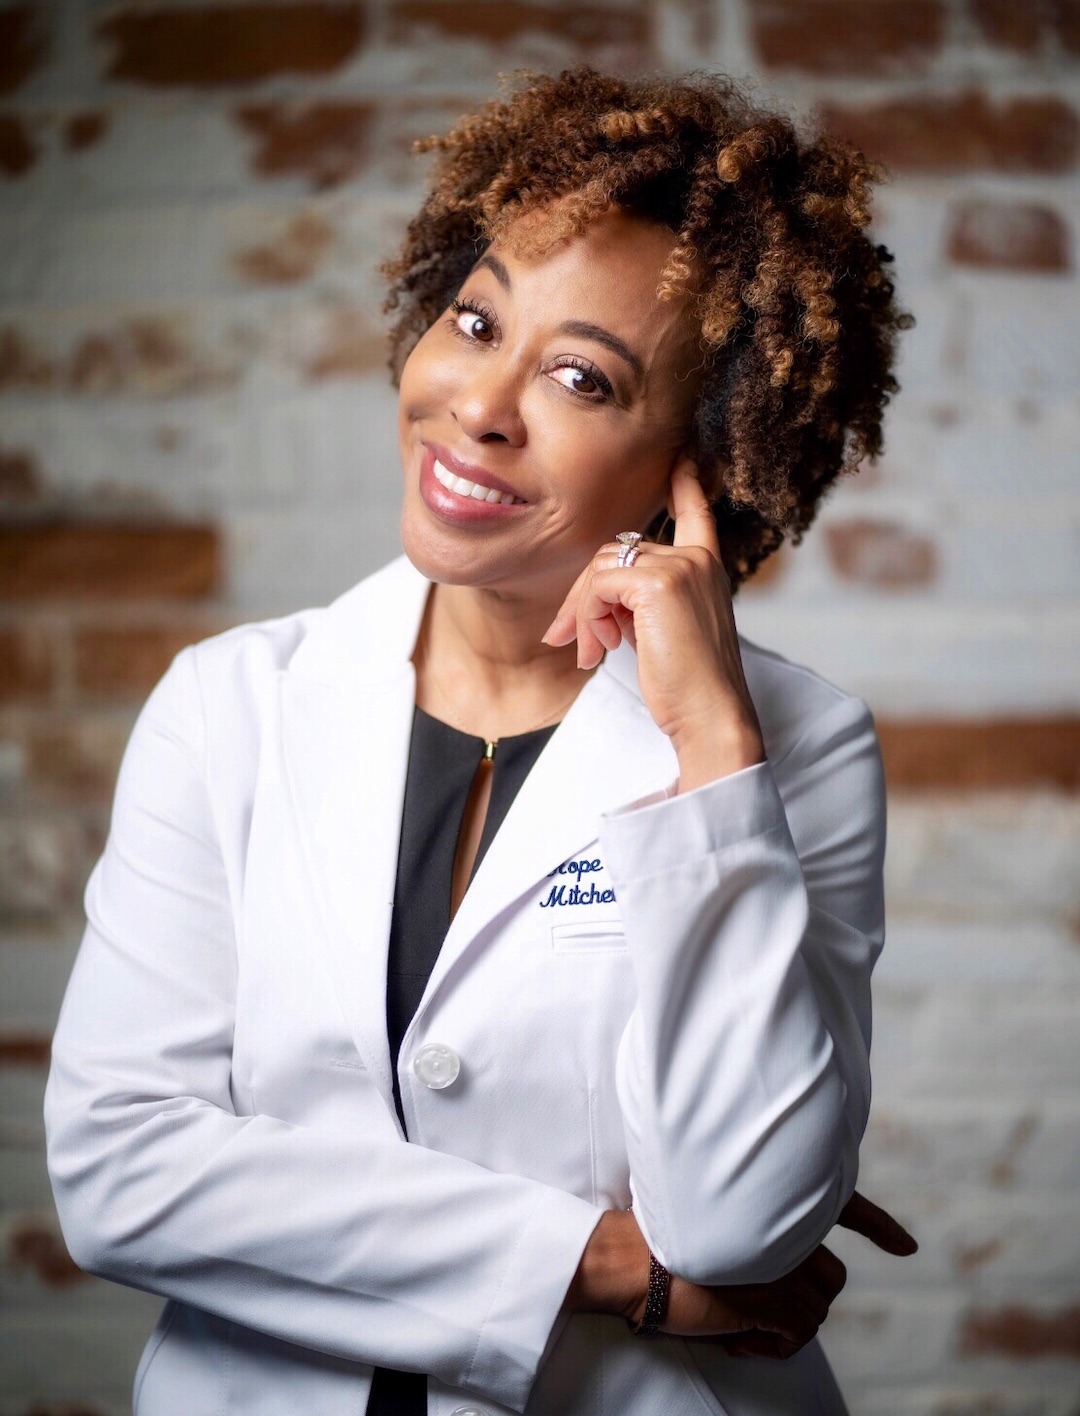 Connected Doctor, Name: Dr. Hope Mitchell